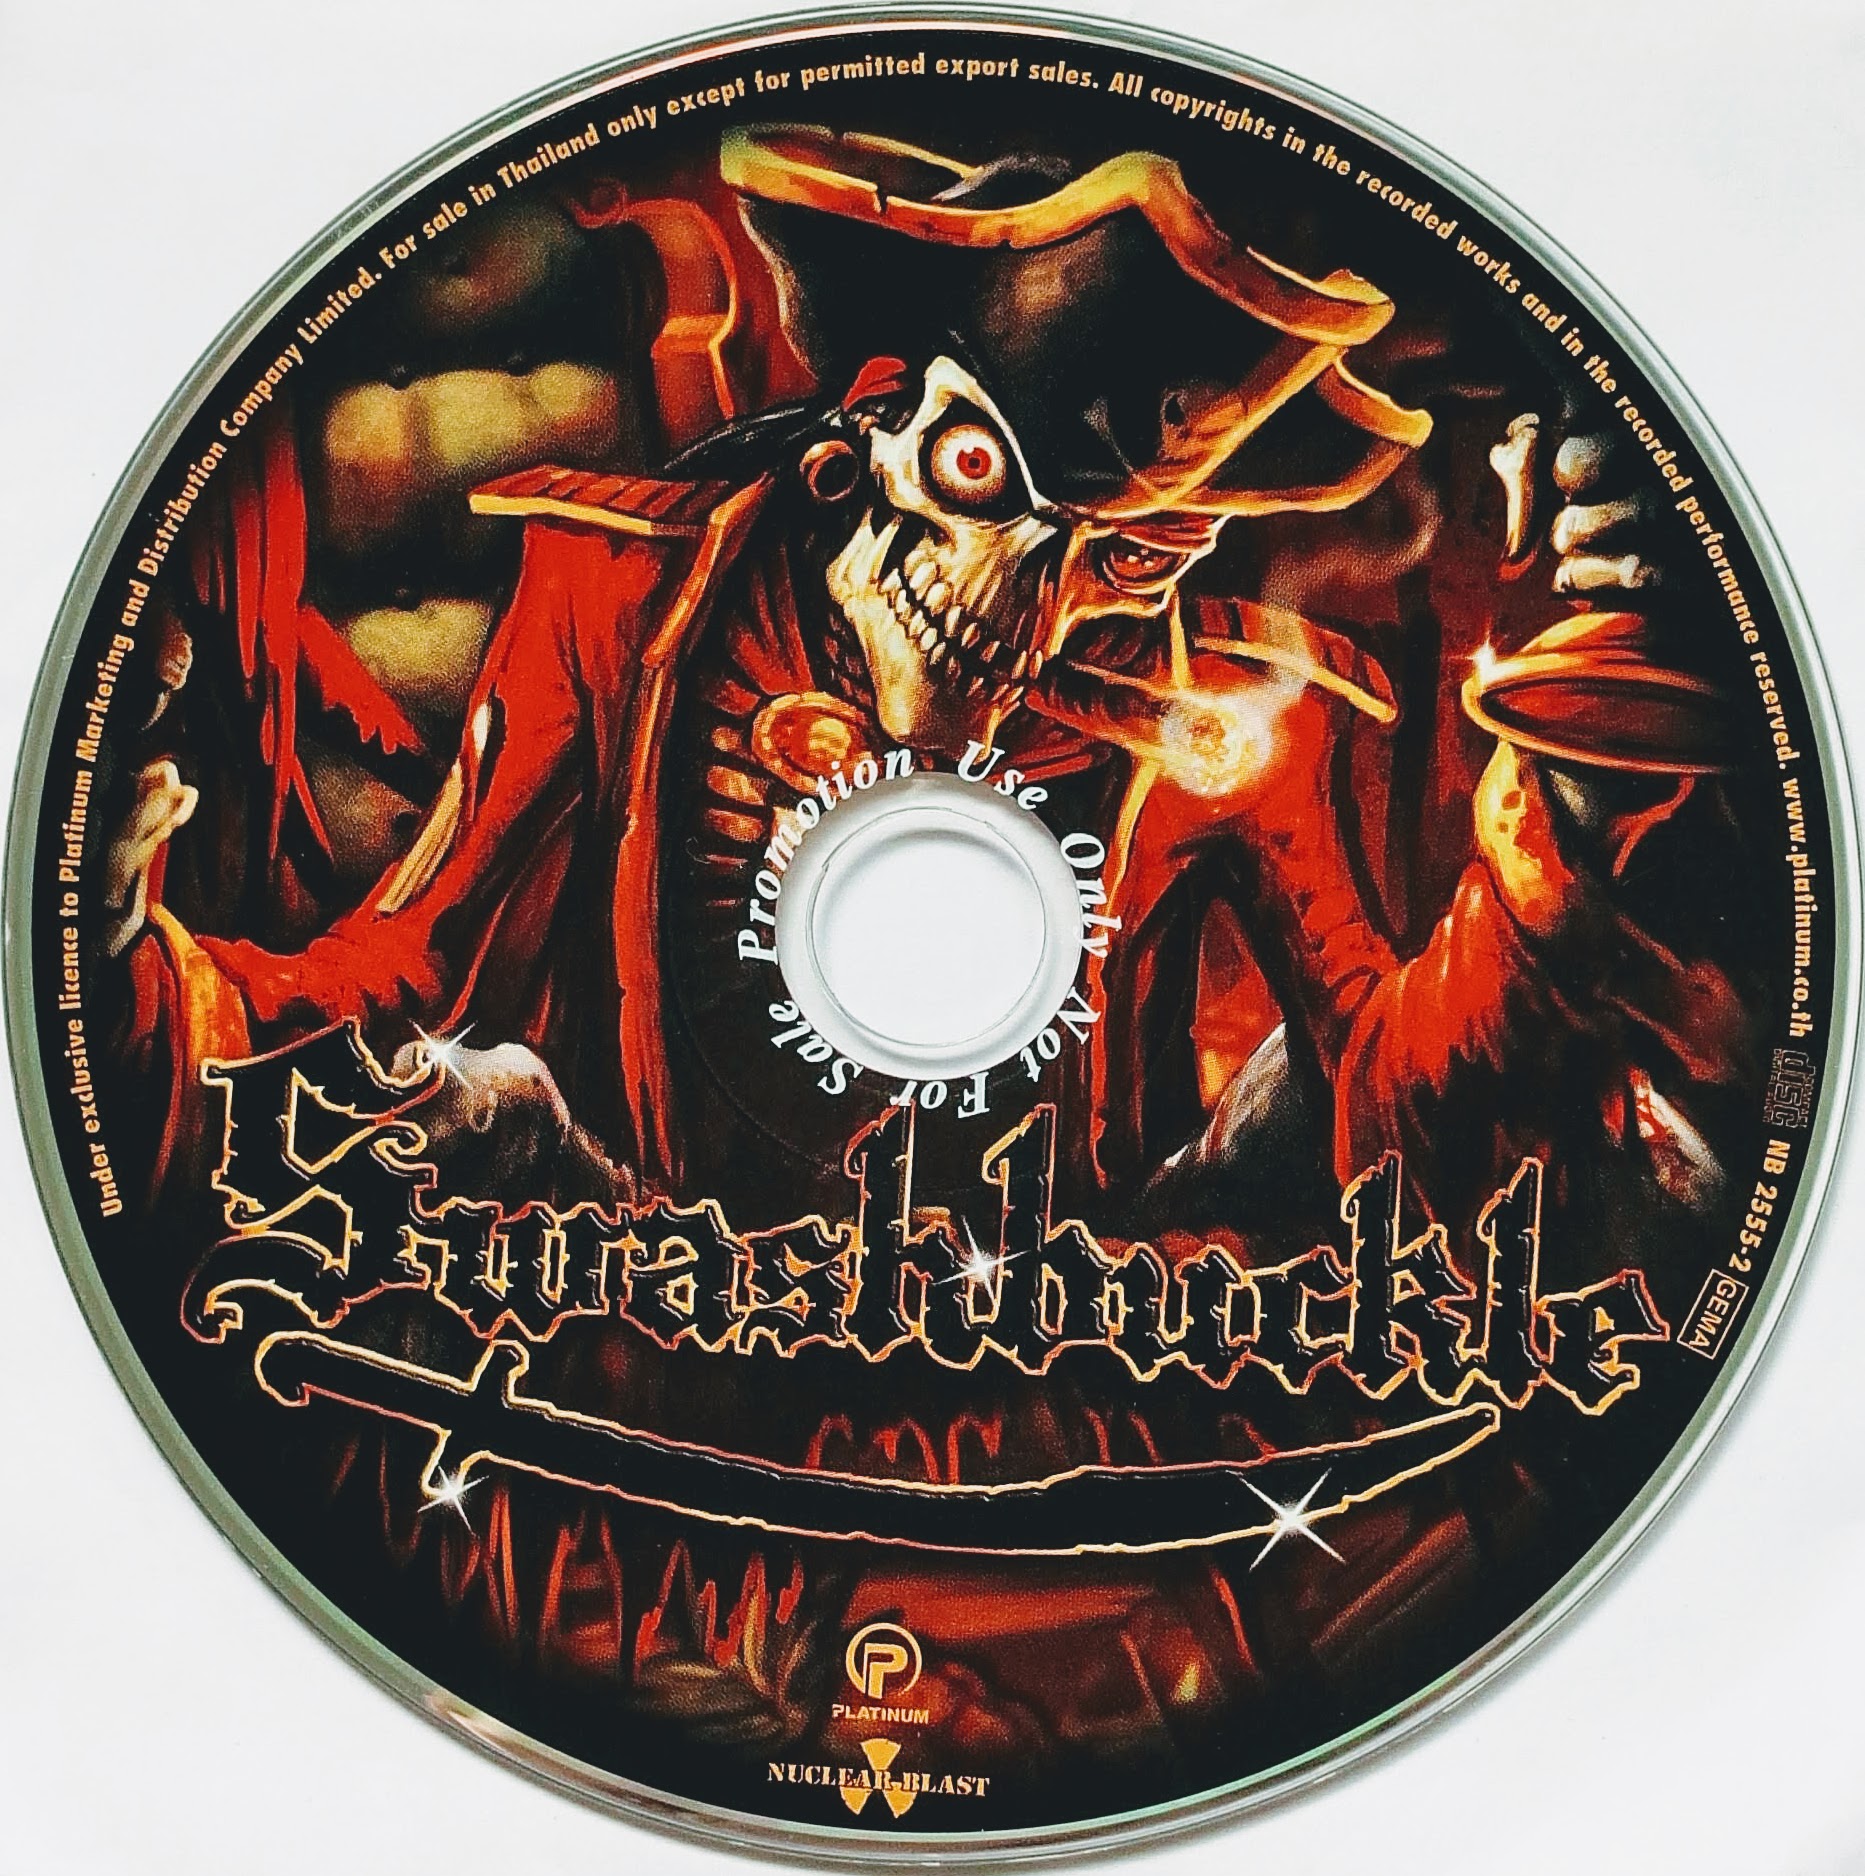 CD (Promotion) Swashbuckle - Crime Always Pays (CD Only)